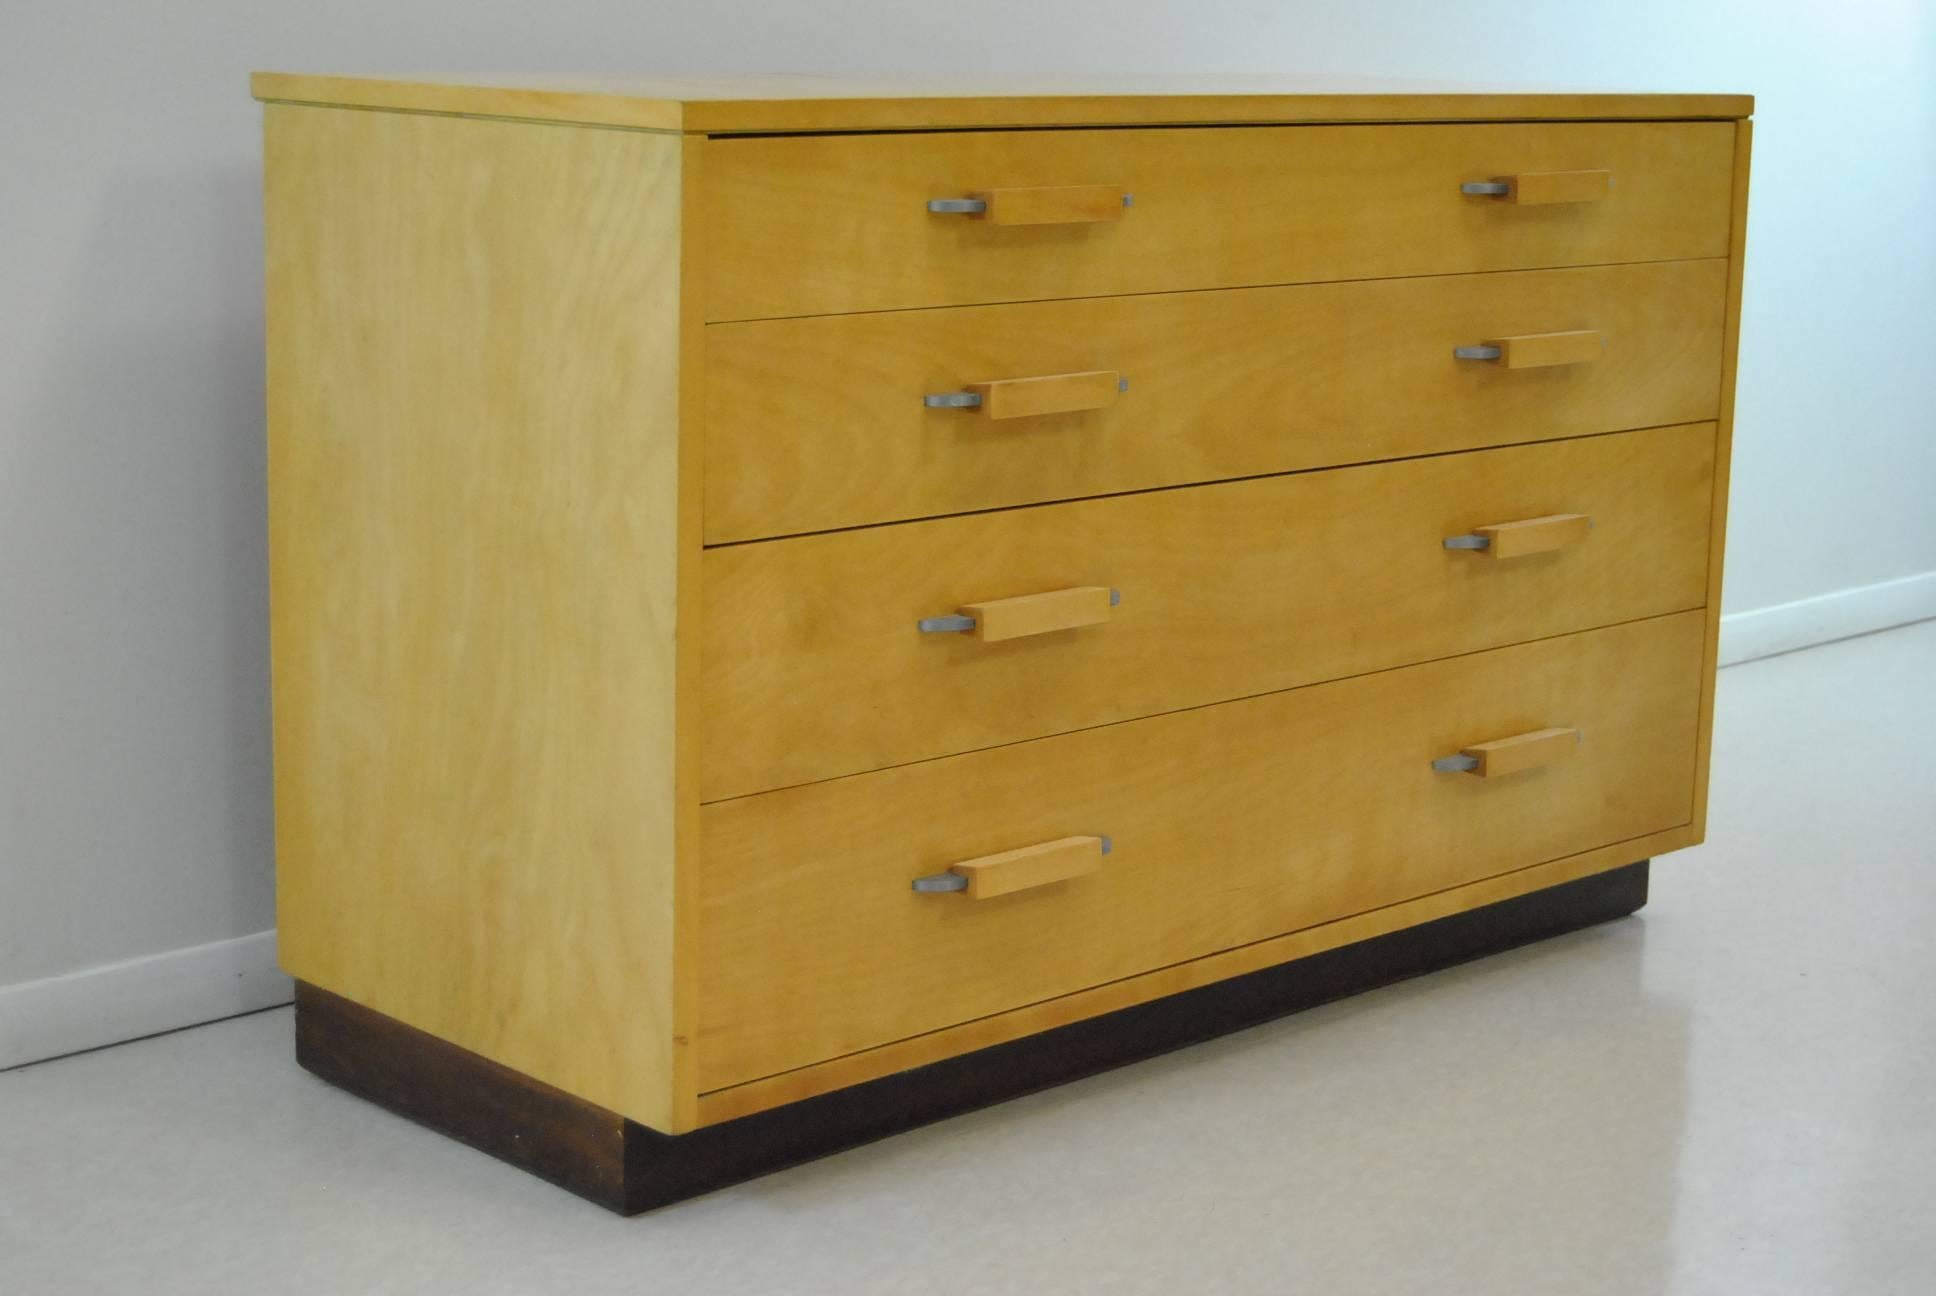 Light birch four-drawer chest by Johnson Furniture Company Grand Rapids Michigan by designer Eilel Saarinen. Original finish and hardware. Overall good pre owned condition. One minor repair to corner of drawer as shown in photo. 